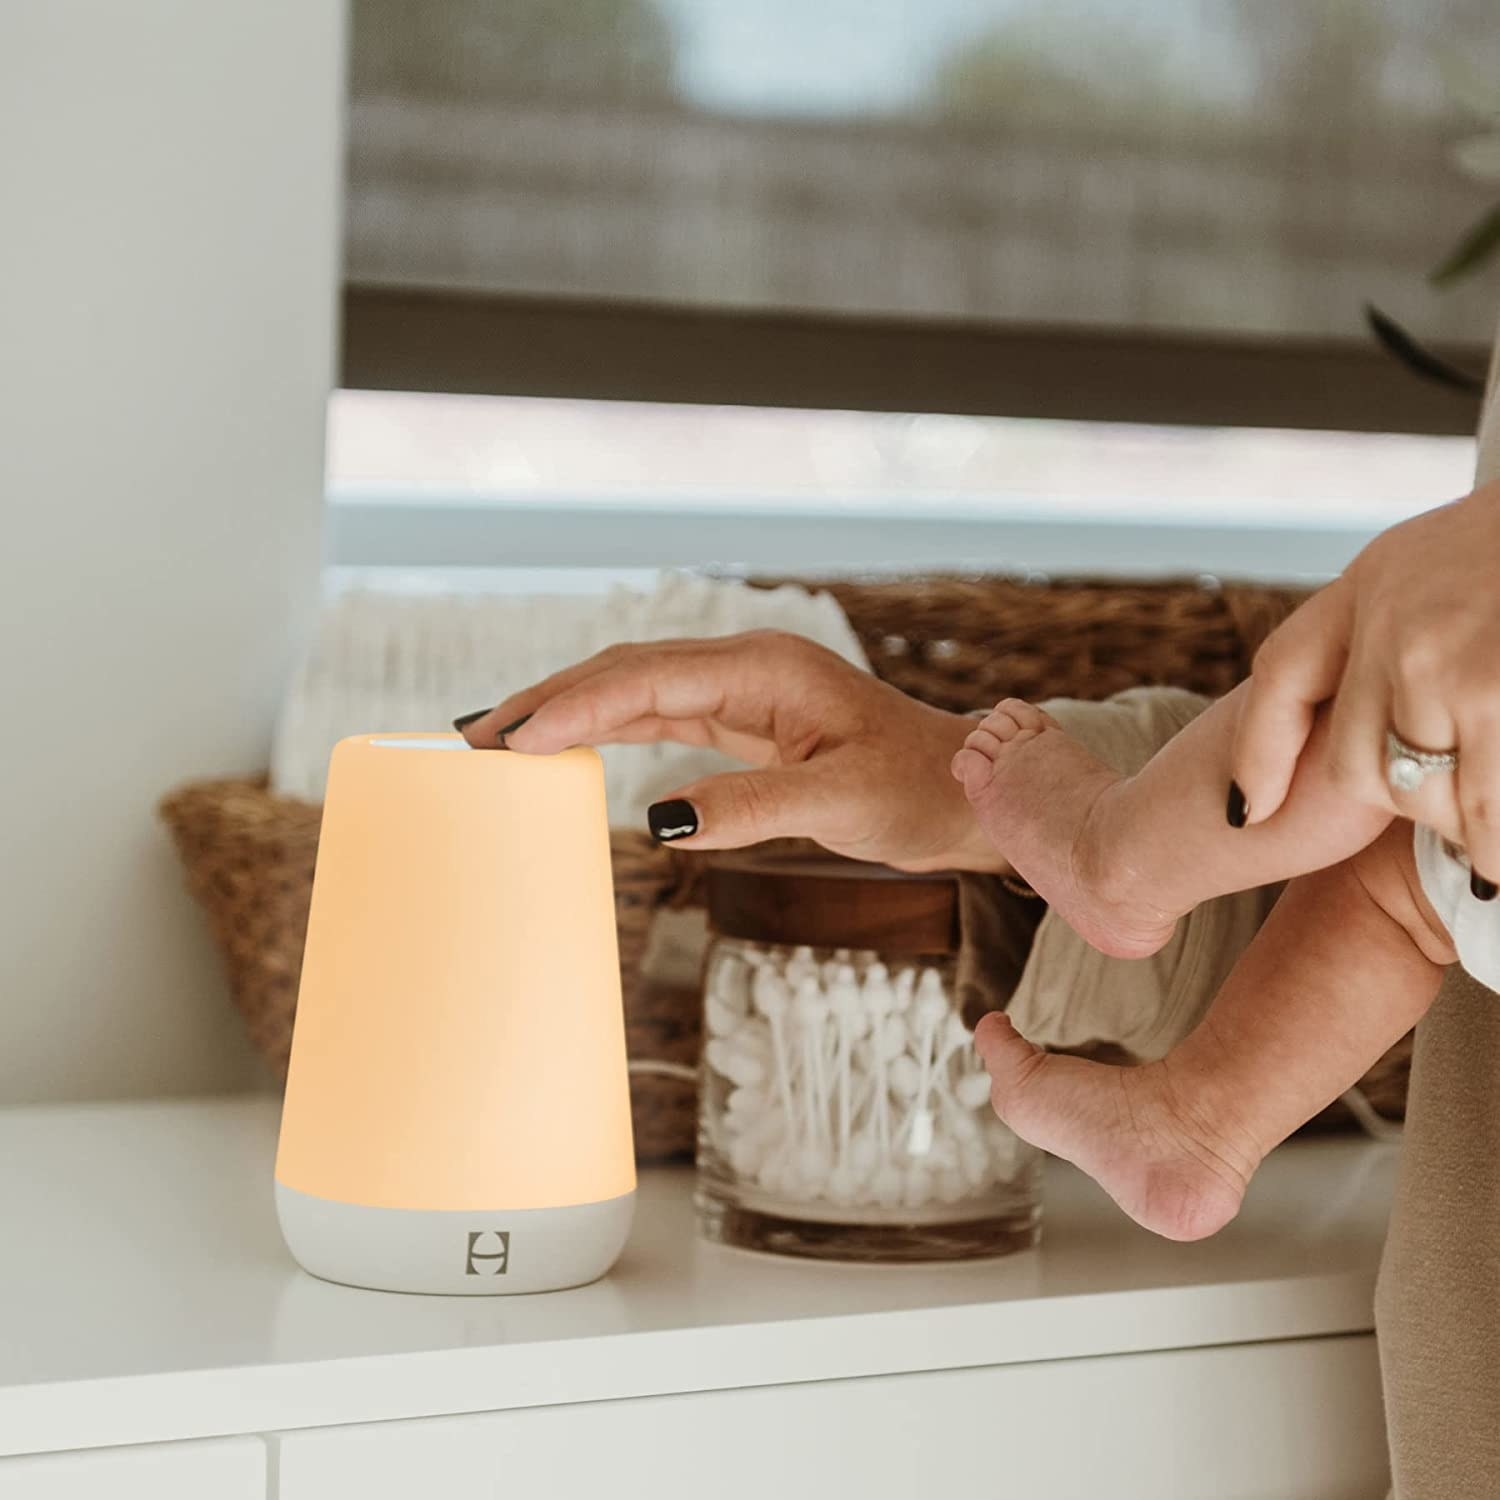 a person tapping the nightlight while holding a baby